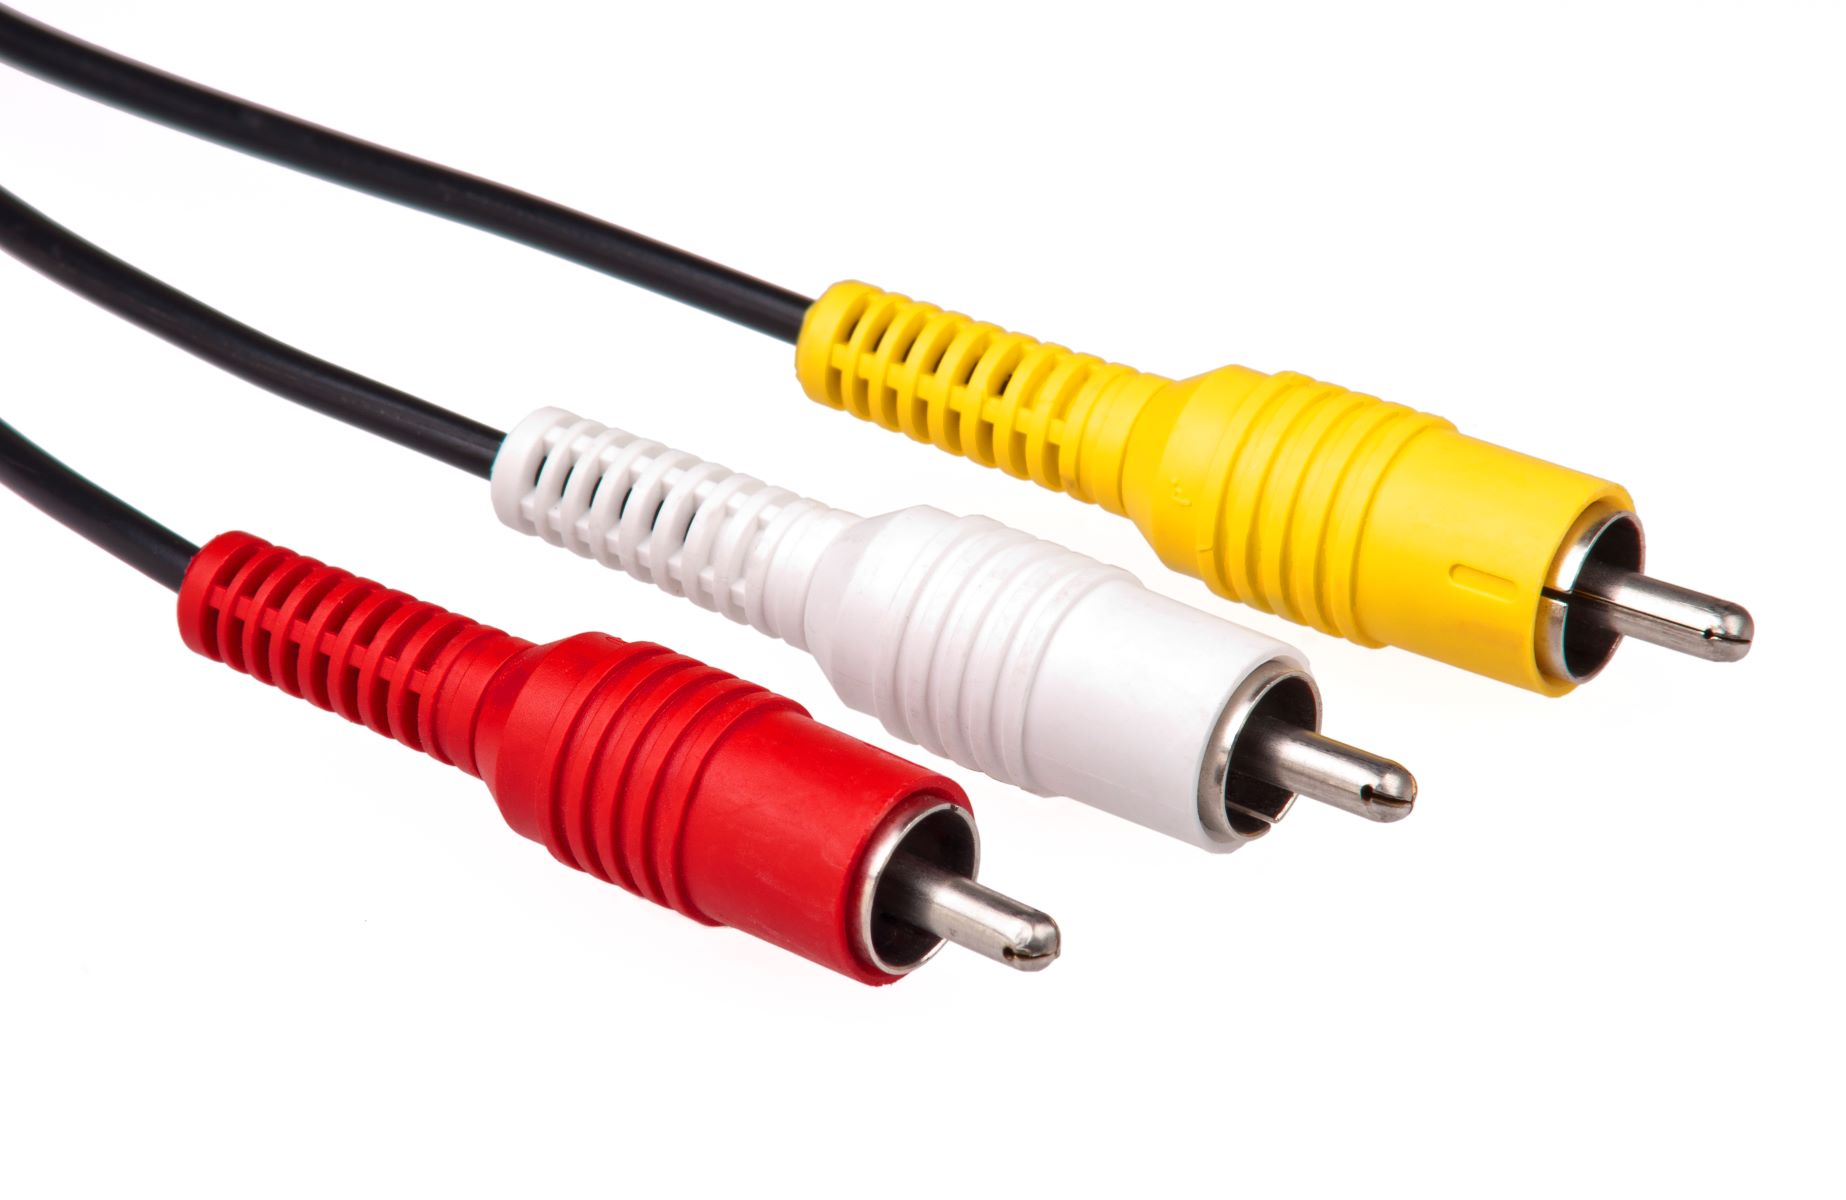 Unleash The Power Of The Red, White, And Yellow Cable Connection!